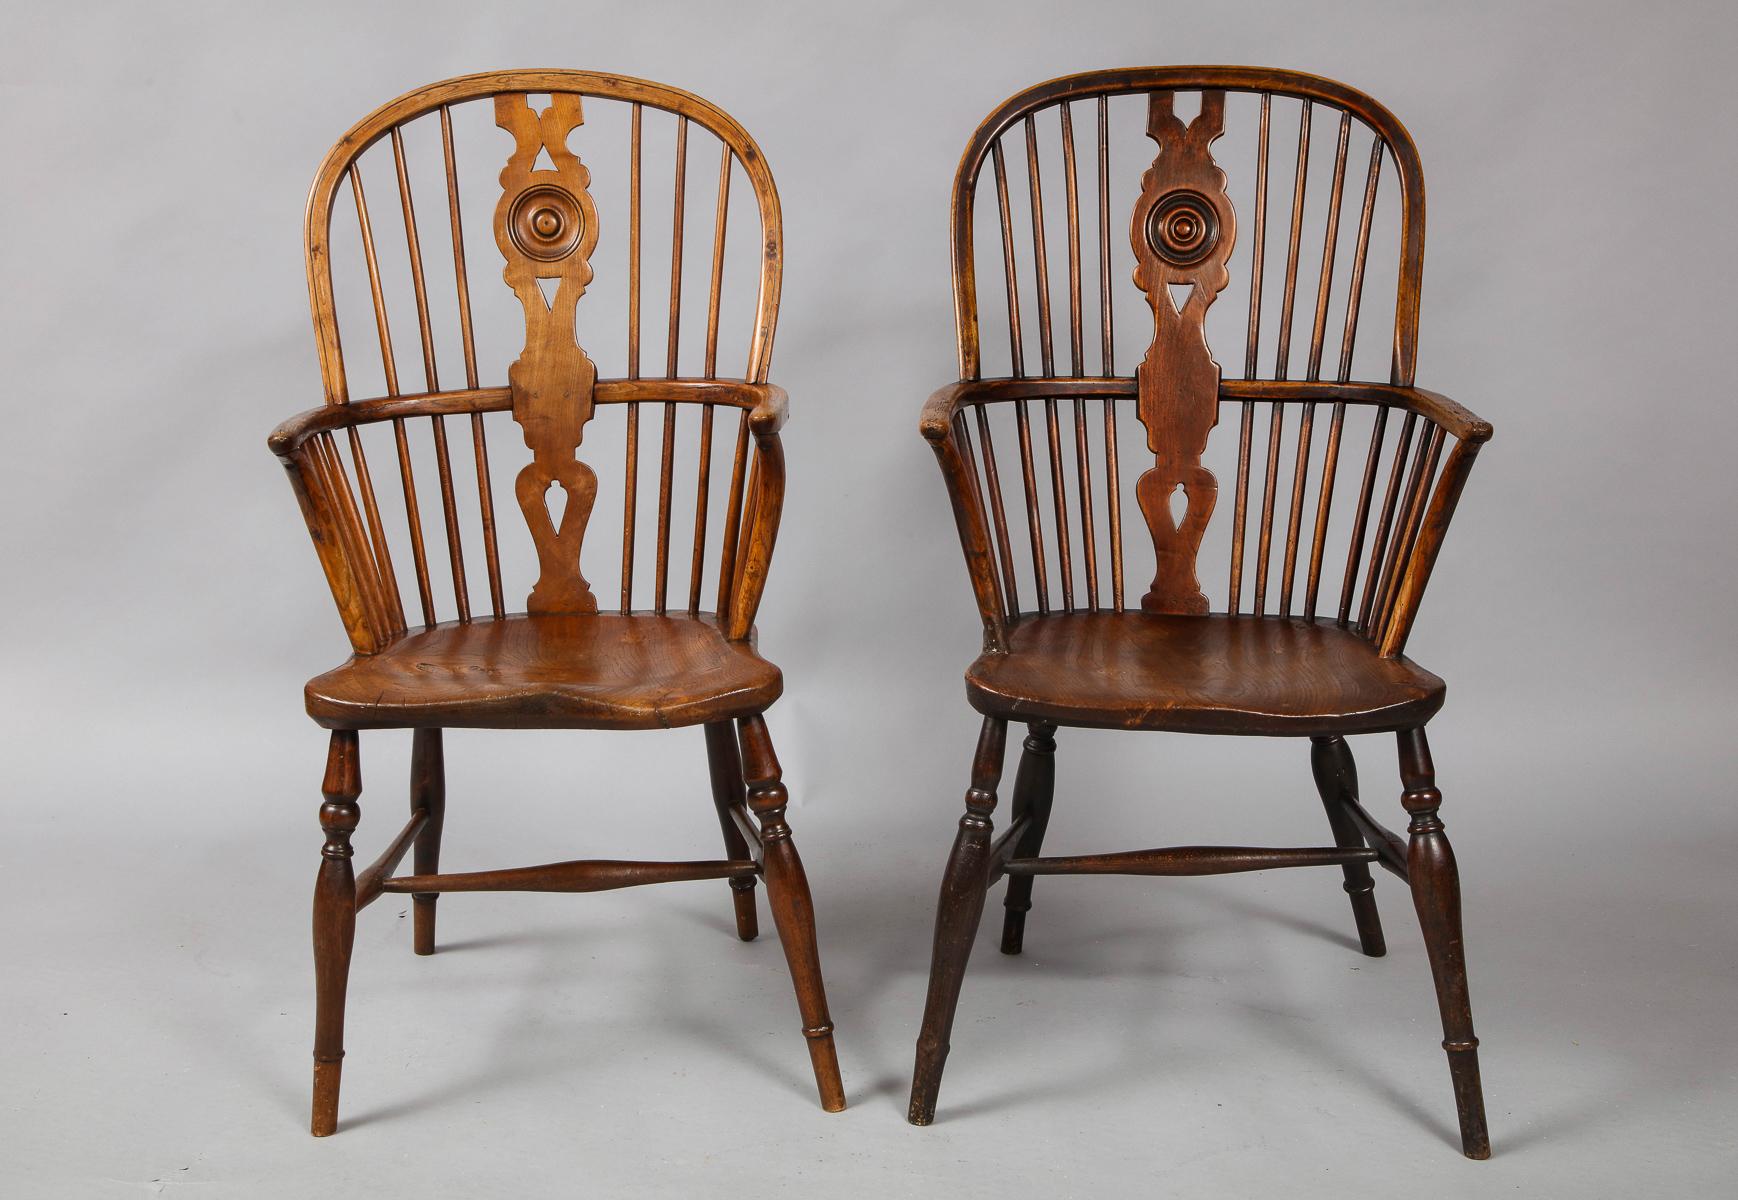 Two English mid-19th century hoop back Windsor chairs with 